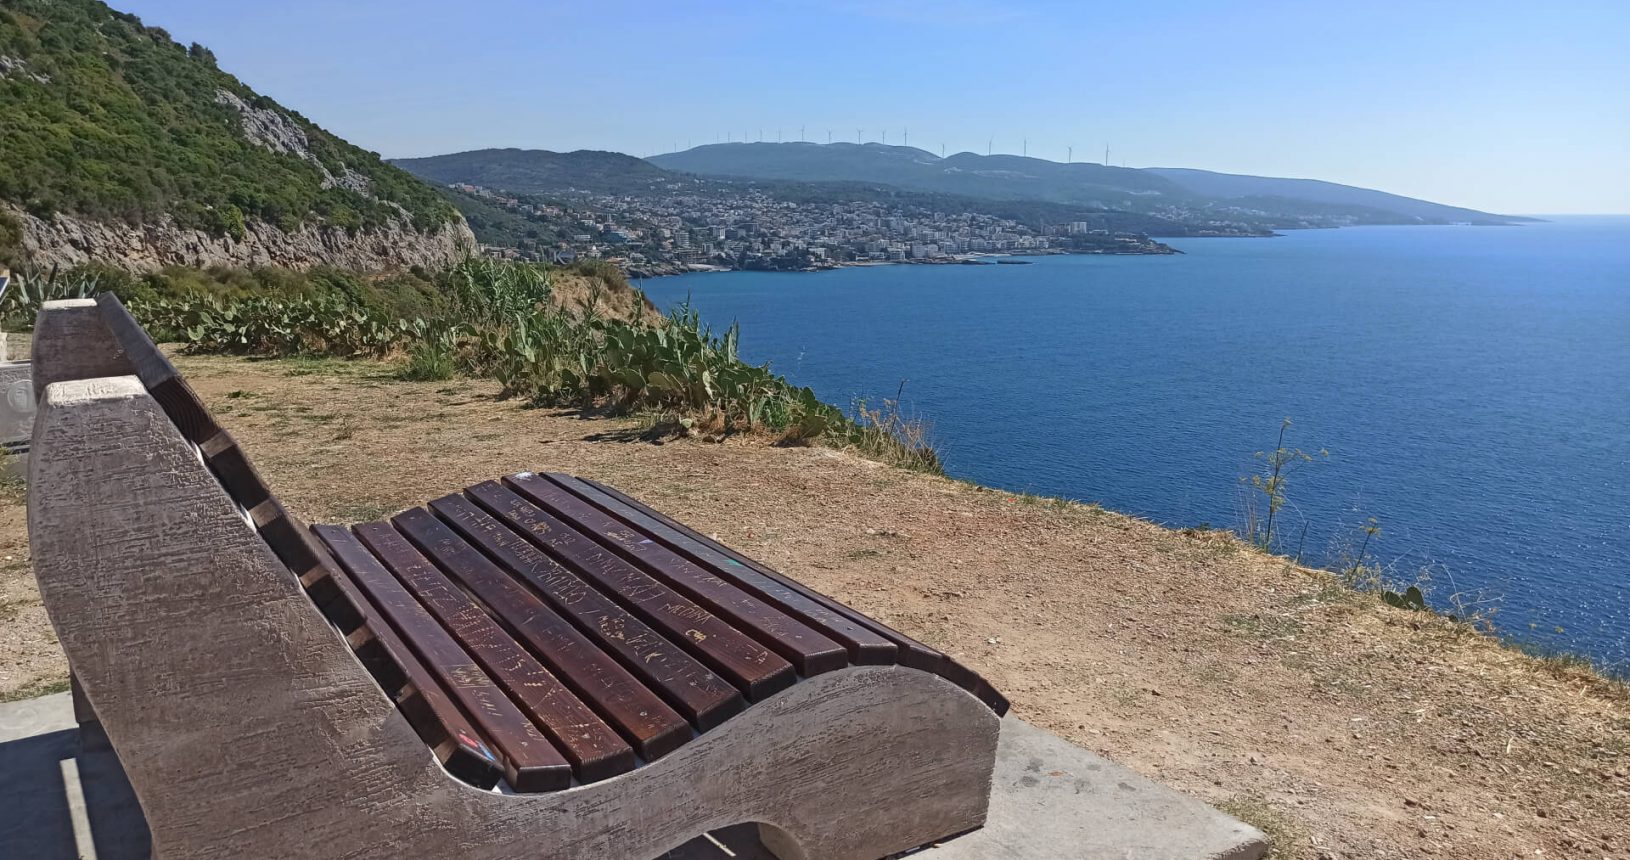 Resting area at Viewpoint Dobra Voda